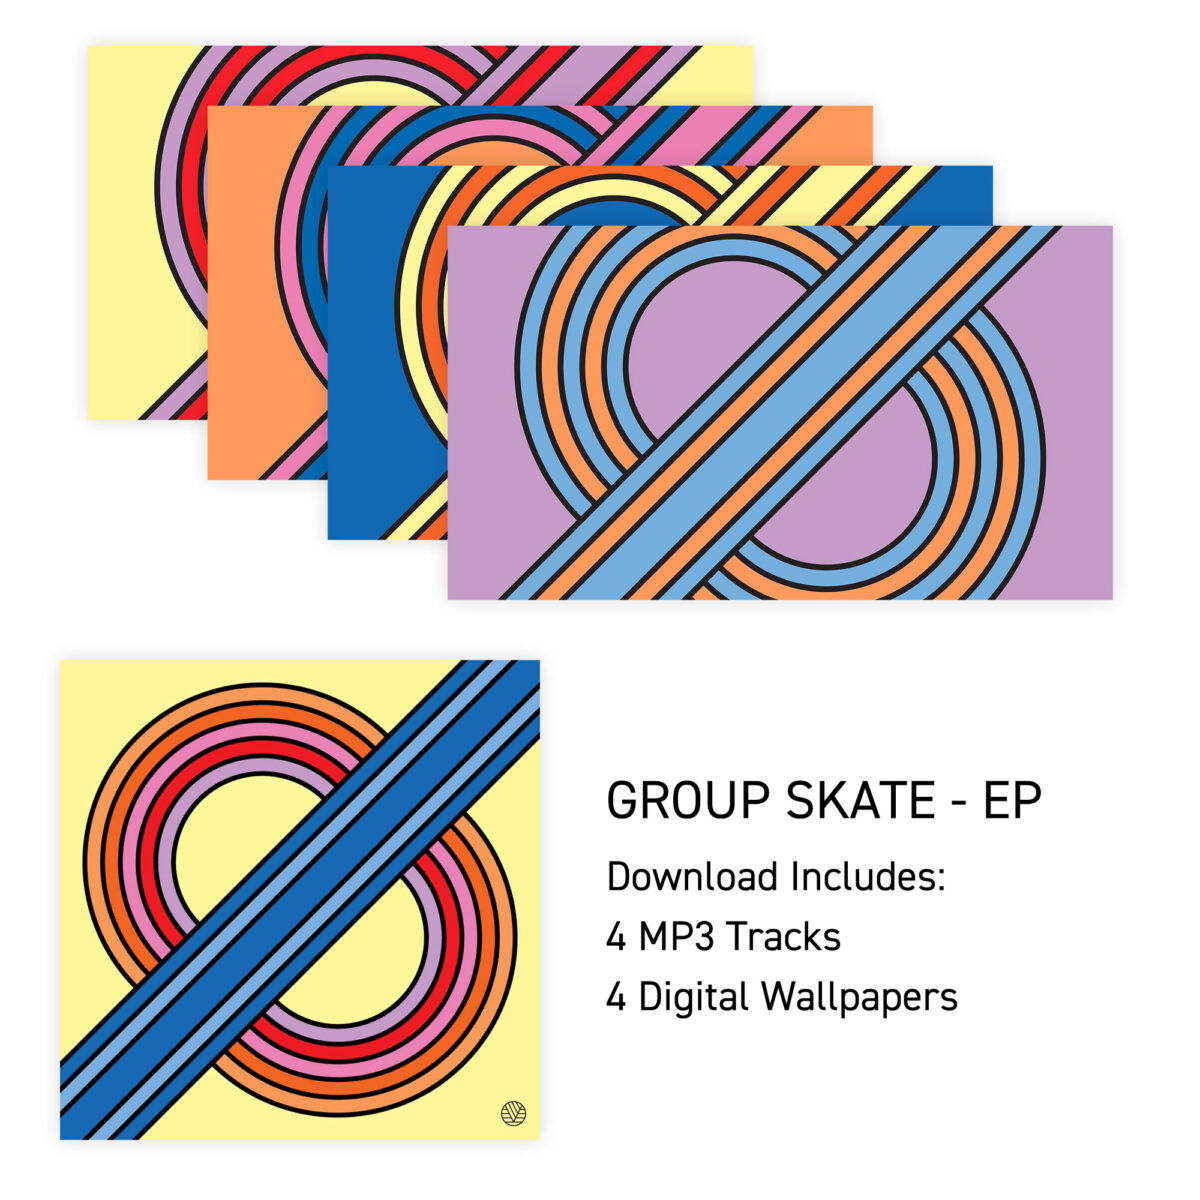 Group Skate EP digital download includes 4 MP3 tracks and 4 digital wallpapers.